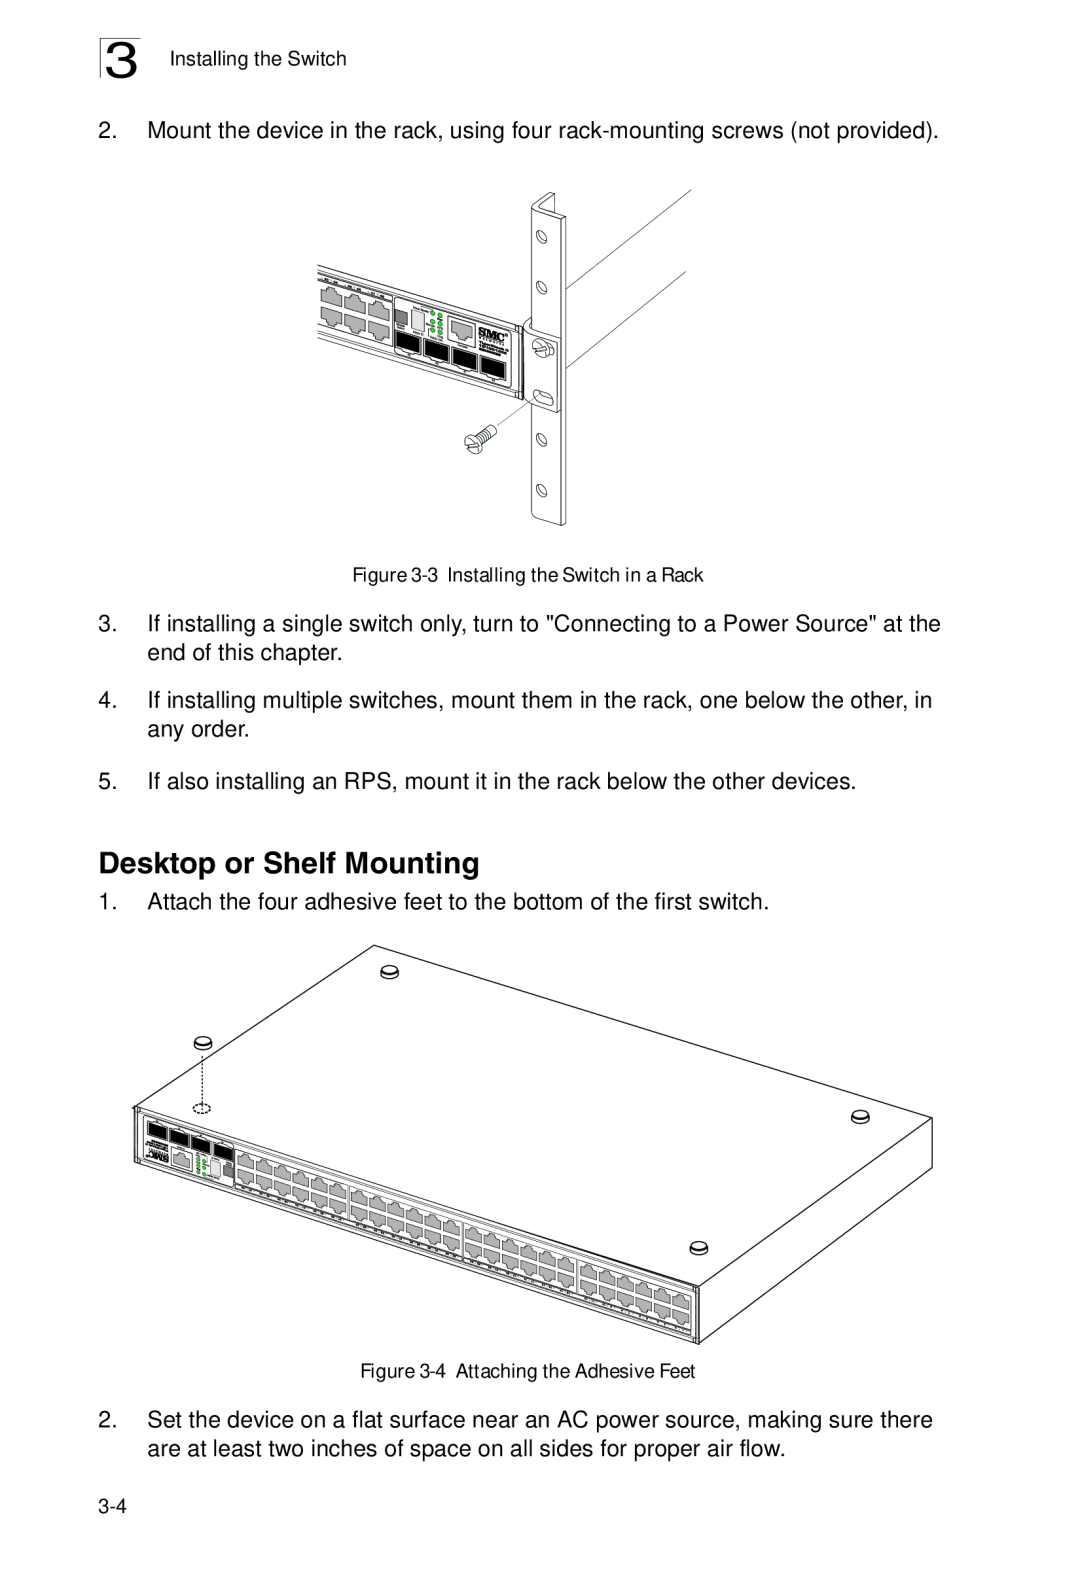 SMC Networks SMC8926EM manual Desktop or Shelf Mounting, 3 Installing the Switch in a Rack, 4 Attaching the Adhesive Feet 